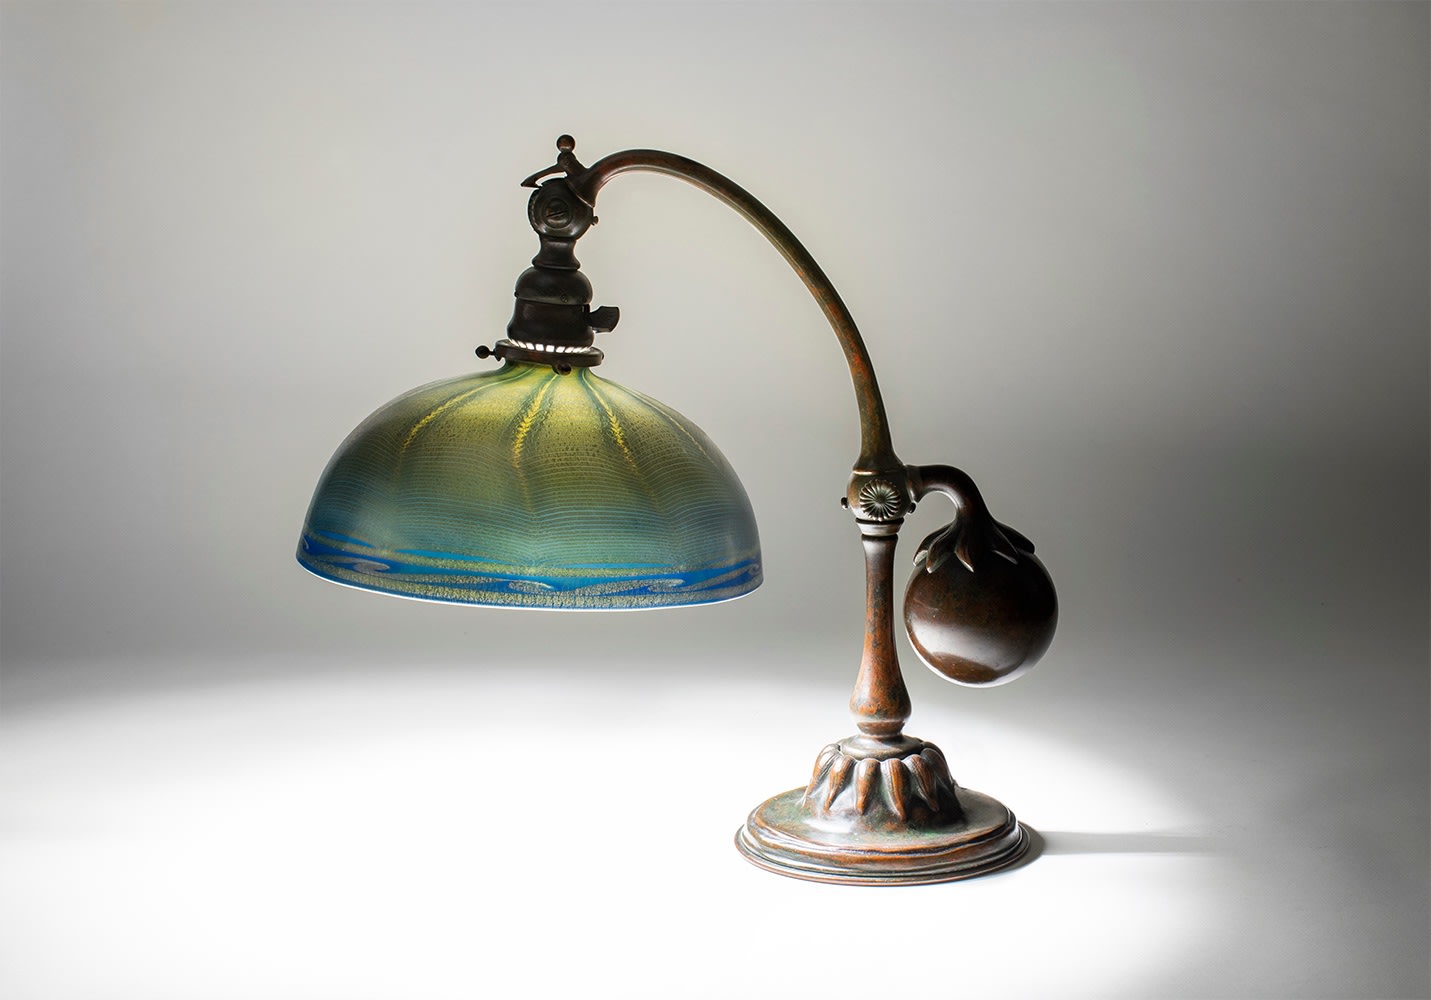 a tiffany desk lamp with bronze counter-balance or &quot;balance weight&quot; base, paired with a blown tiffany favrile glass &quot;damascene&quot; shade in dark blue with iridescent decoration